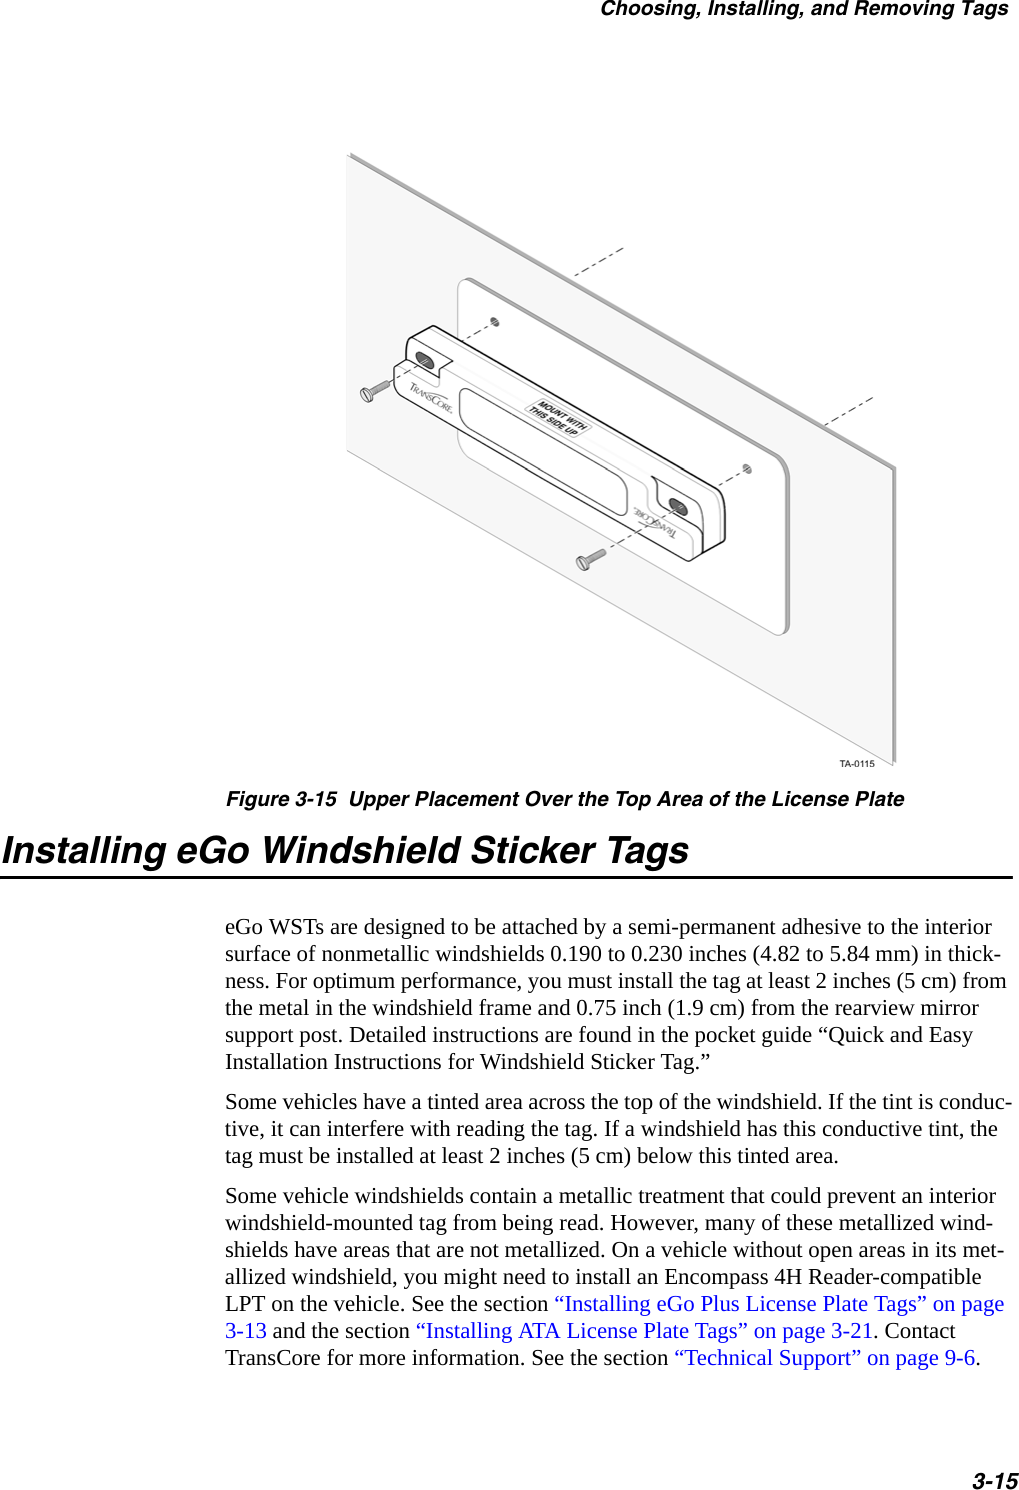 Choosing, Installing, and Removing Tags3-15Figure 3-15  Upper Placement Over the Top Area of the License PlateInstalling eGo Windshield Sticker TagseGo WSTs are designed to be attached by a semi-permanent adhesive to the interior surface of nonmetallic windshields 0.190 to 0.230 inches (4.82 to 5.84 mm) in thick-ness. For optimum performance, you must install the tag at least 2 inches (5 cm) from the metal in the windshield frame and 0.75 inch (1.9 cm) from the rearview mirror support post. Detailed instructions are found in the pocket guide “Quick and Easy Installation Instructions for Windshield Sticker Tag.”Some vehicles have a tinted area across the top of the windshield. If the tint is conduc-tive, it can interfere with reading the tag. If a windshield has this conductive tint, the tag must be installed at least 2 inches (5 cm) below this tinted area.Some vehicle windshields contain a metallic treatment that could prevent an interior windshield-mounted tag from being read. However, many of these metallized wind-shields have areas that are not metallized. On a vehicle without open areas in its met-allized windshield, you might need to install an Encompass 4H Reader-compatible LPT on the vehicle. See the section “Installing eGo Plus License Plate Tags” on page 3-13 and the section “Installing ATA License Plate Tags” on page 3-21. Contact TransCore for more information. See the section “Technical Support” on page 9-6. 